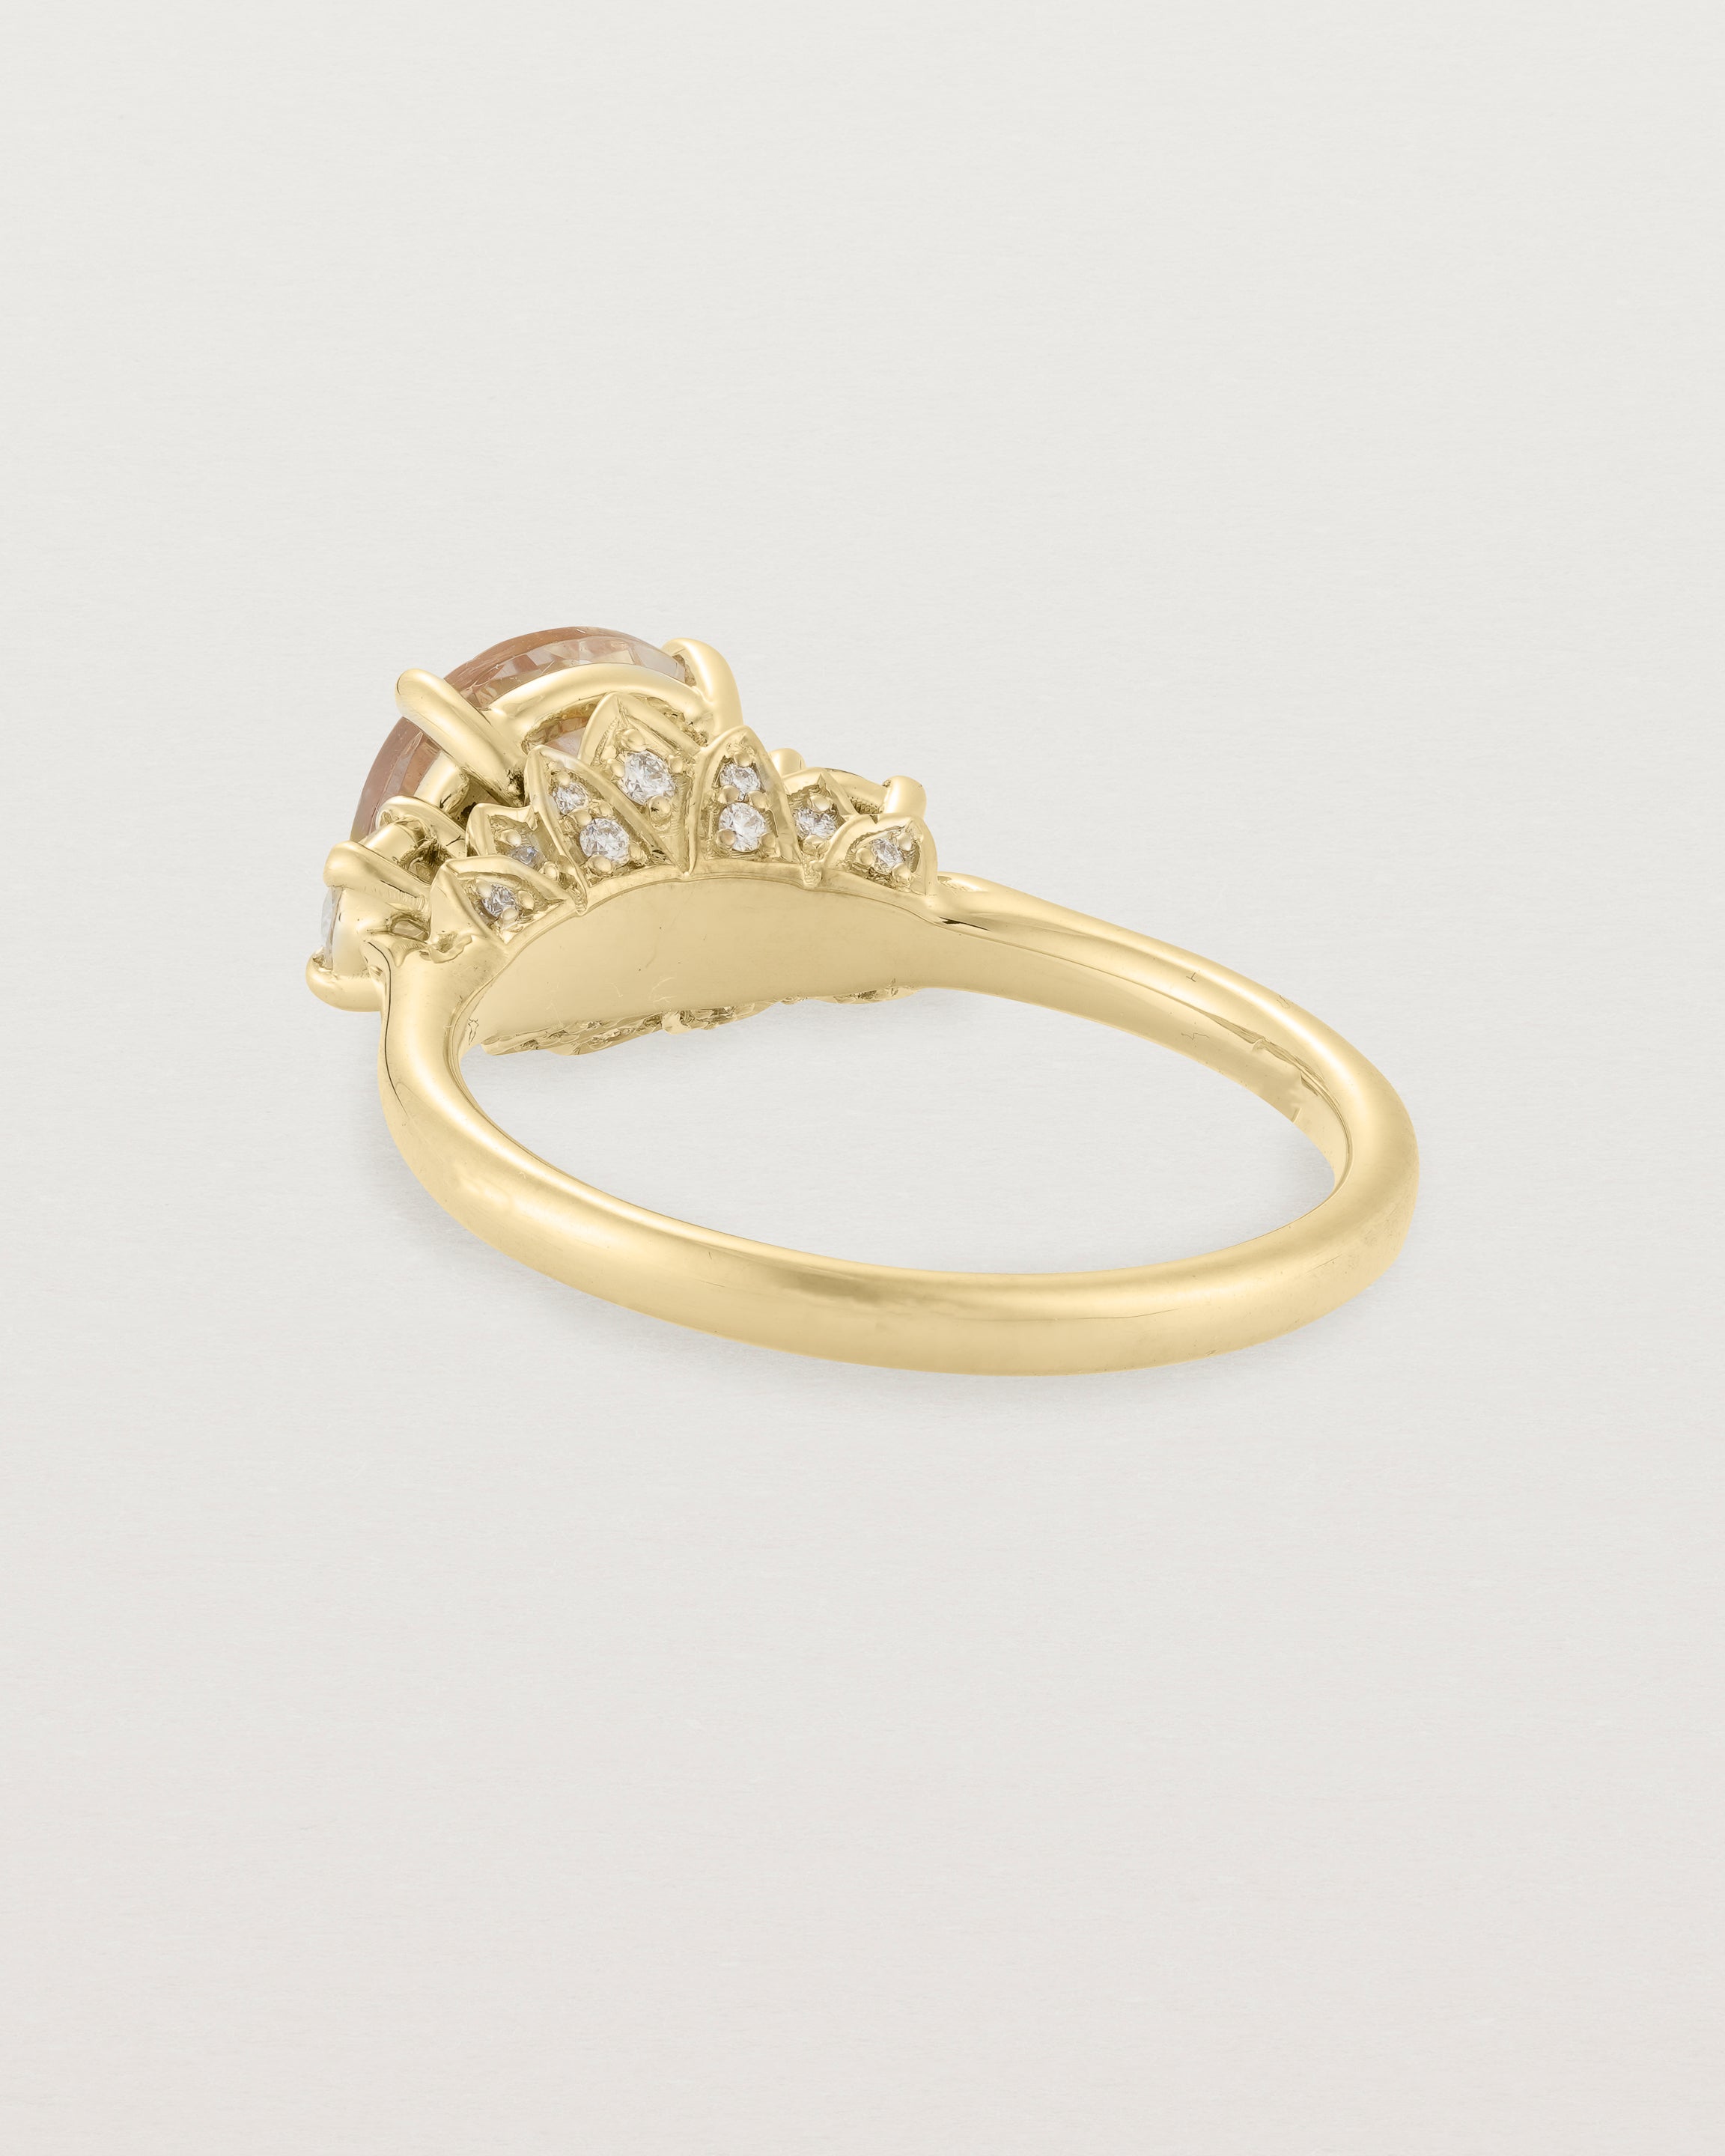 Back view of the Laurel Round Trio Ring | Savannah Sunstone | Yellow Gold.